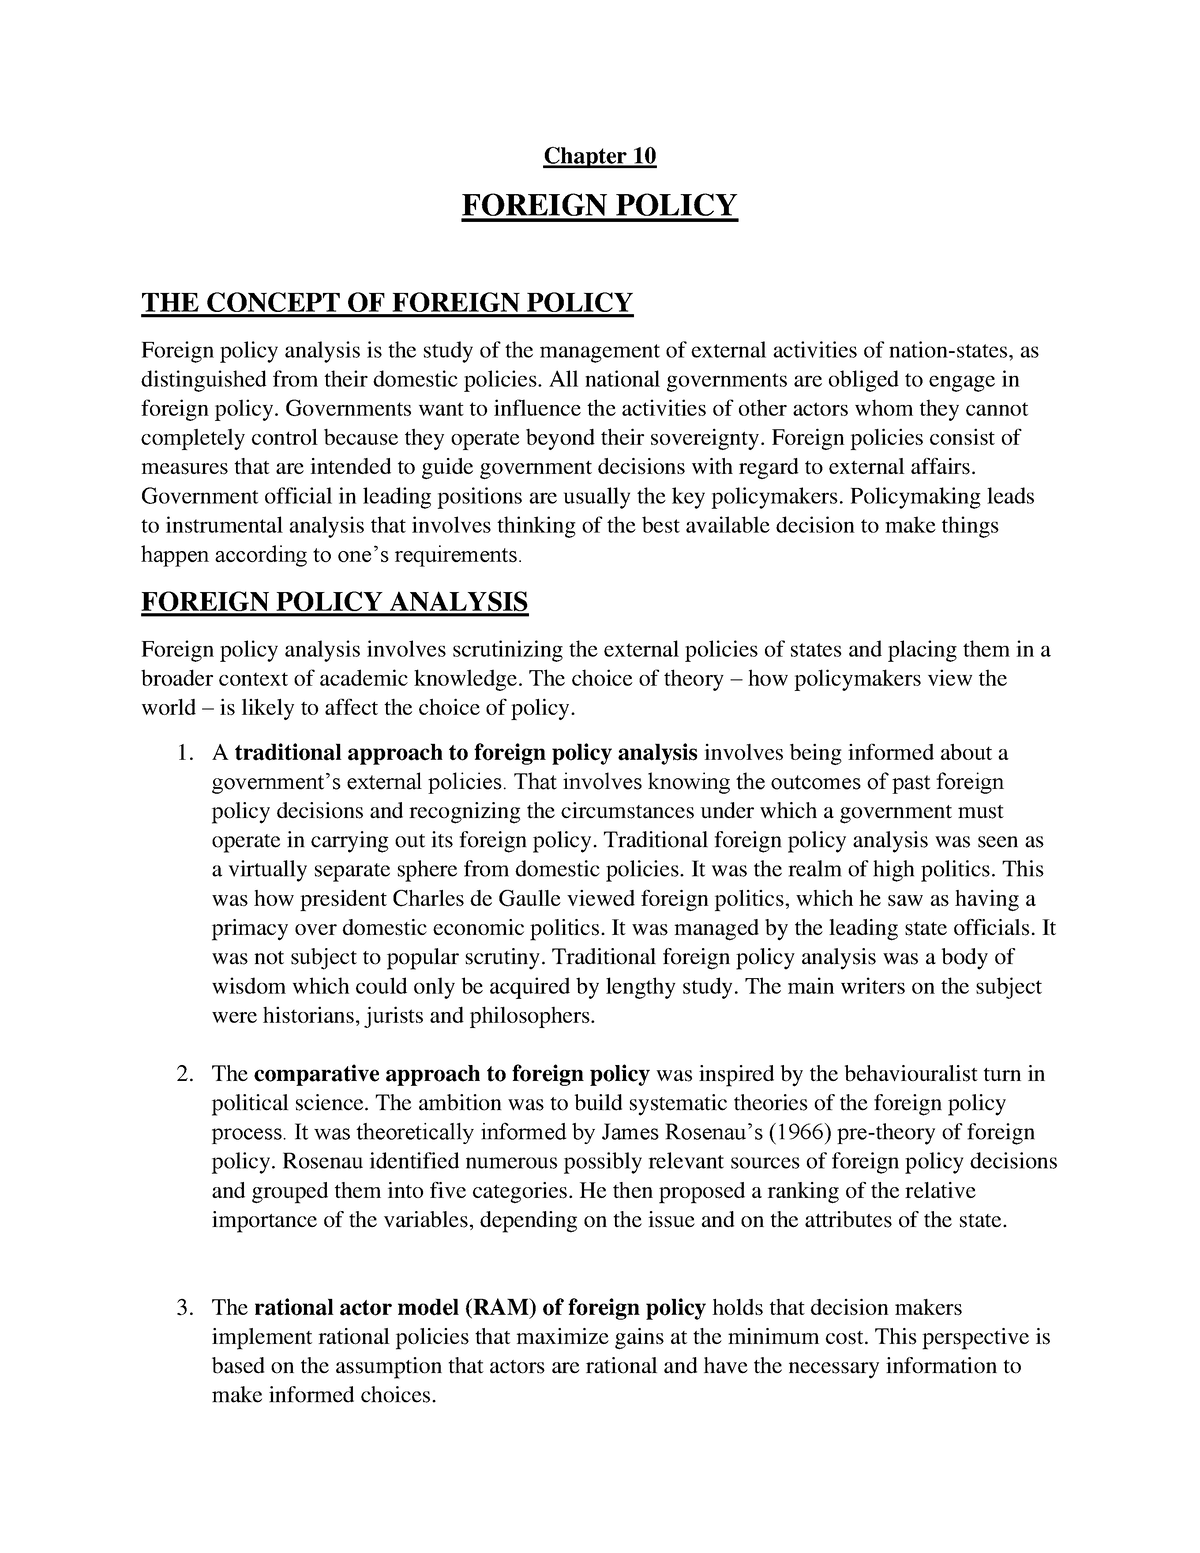 foreign policy research paper topics